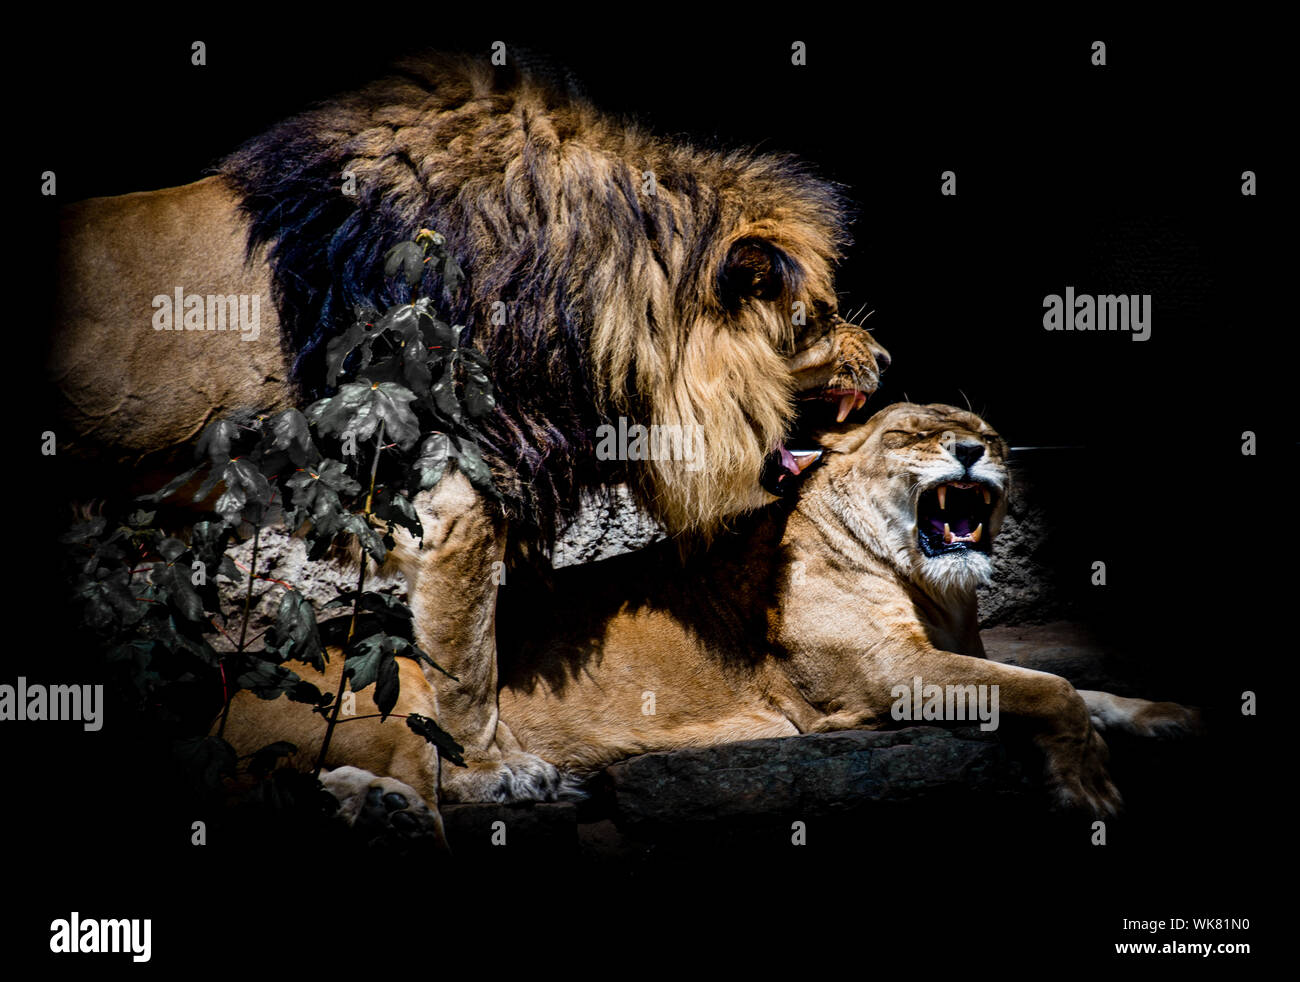 Lion and lioness against black background with full manes and sharp teeth Stock Photo